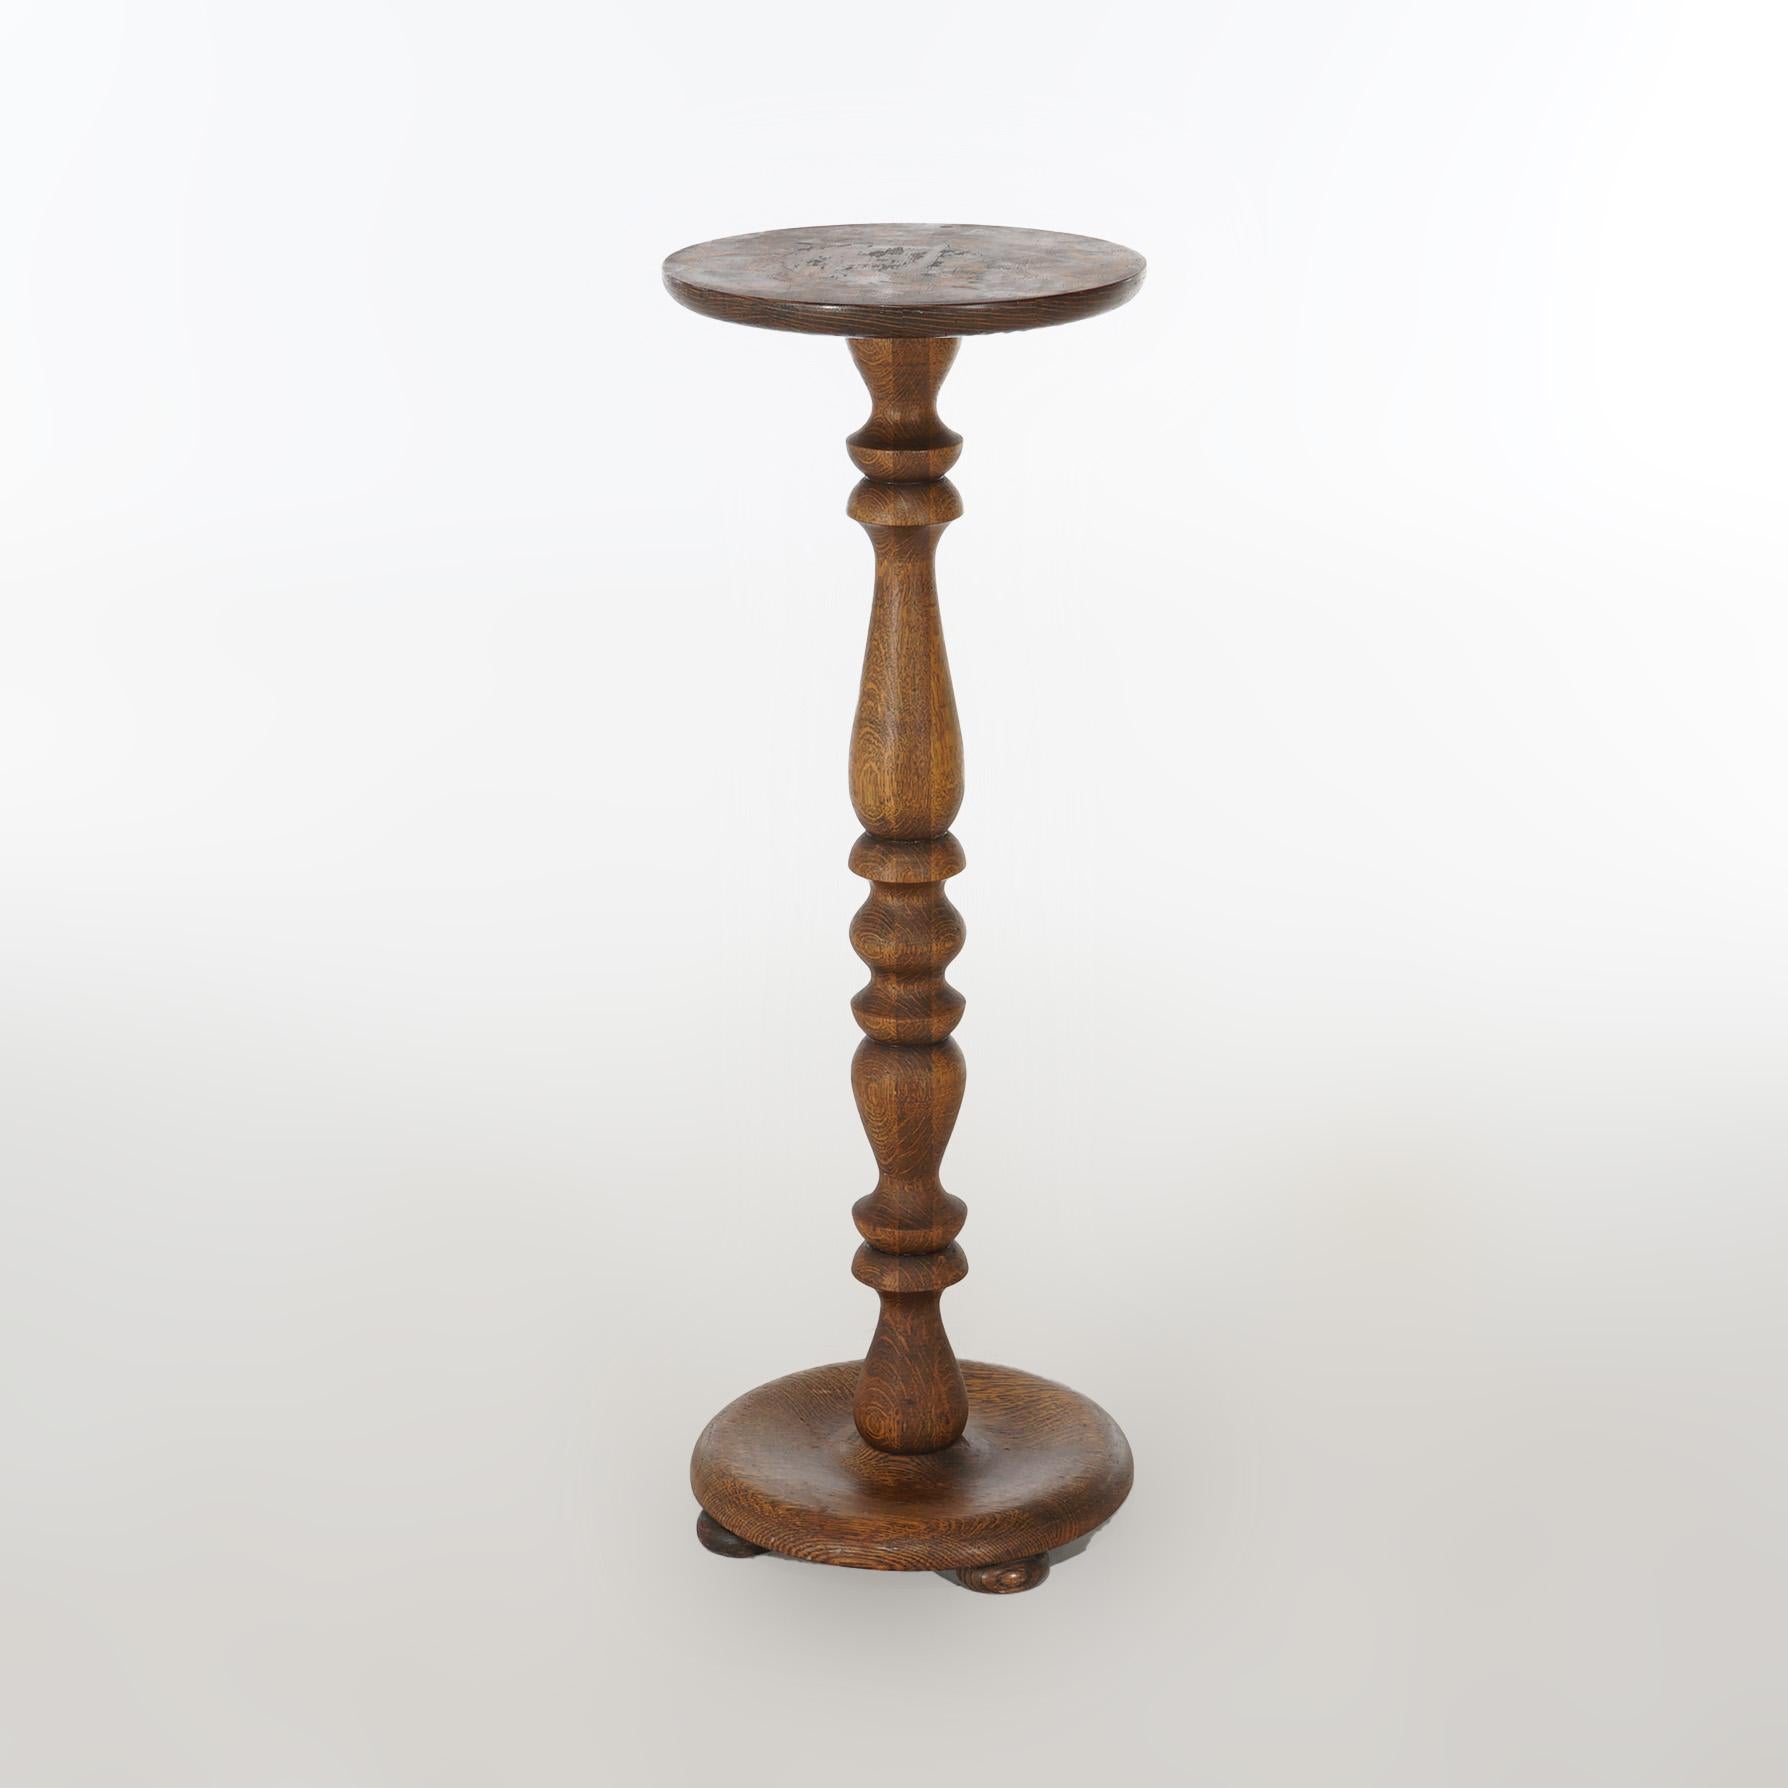 An antique Arts & Crafts plant stand offers oak construction with circular  display over turned balustrade form column on circular footed base, c1910

Measures - 34.5